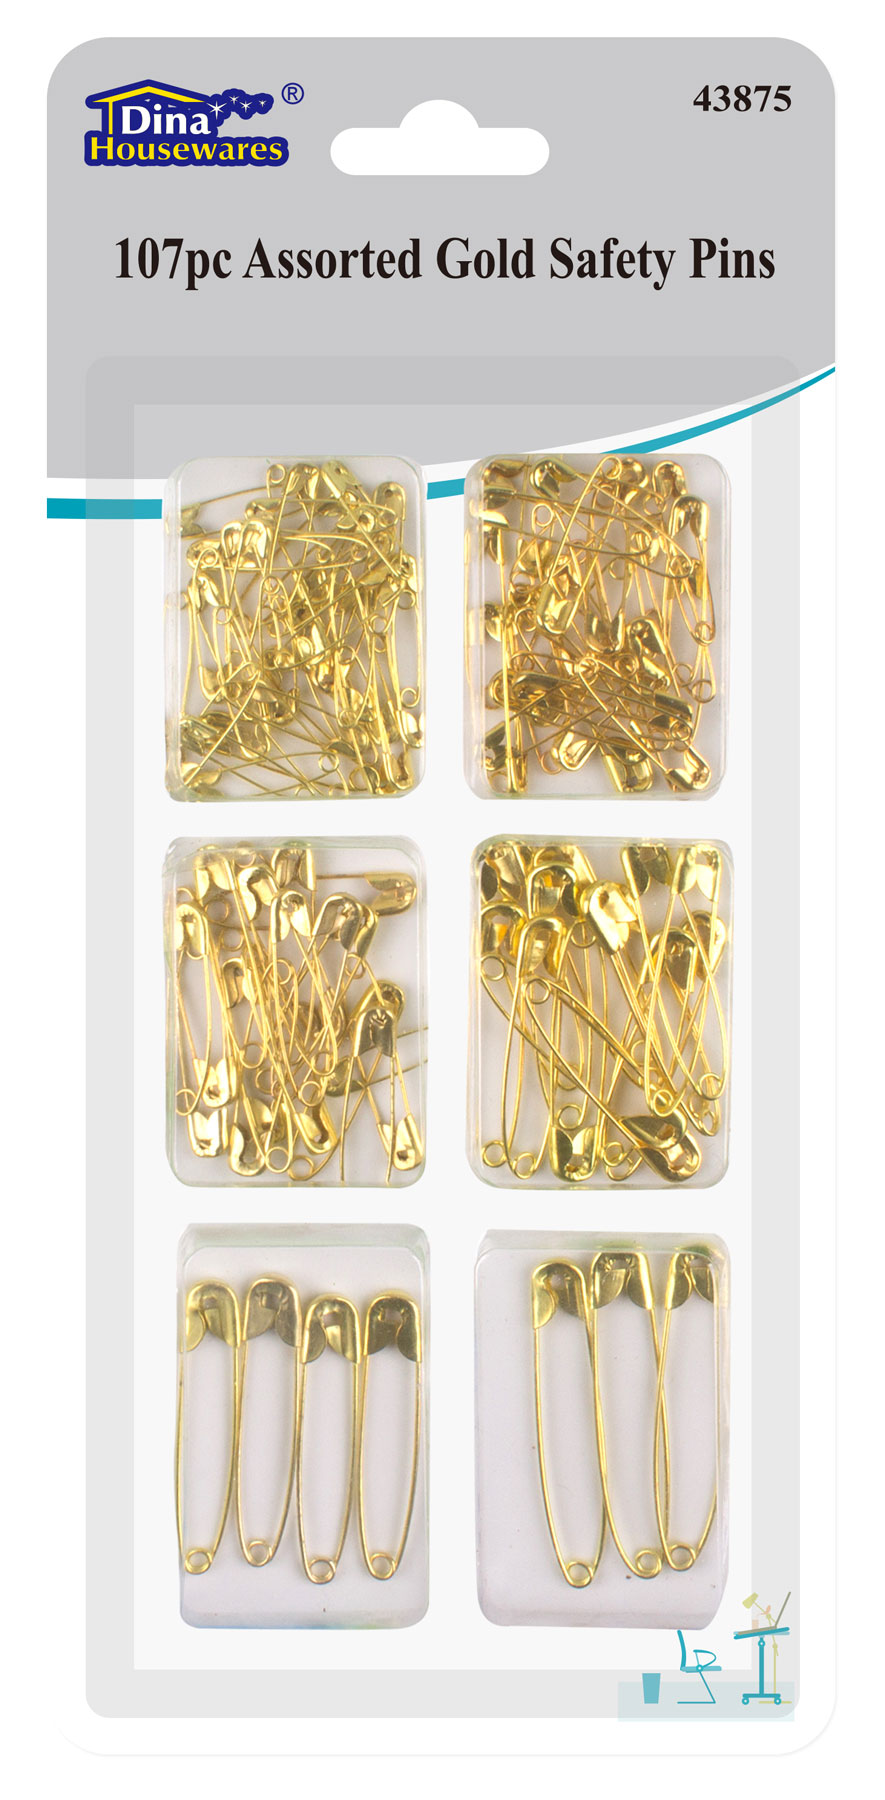 107PC ASSORTED GOLD SAFETY PINS